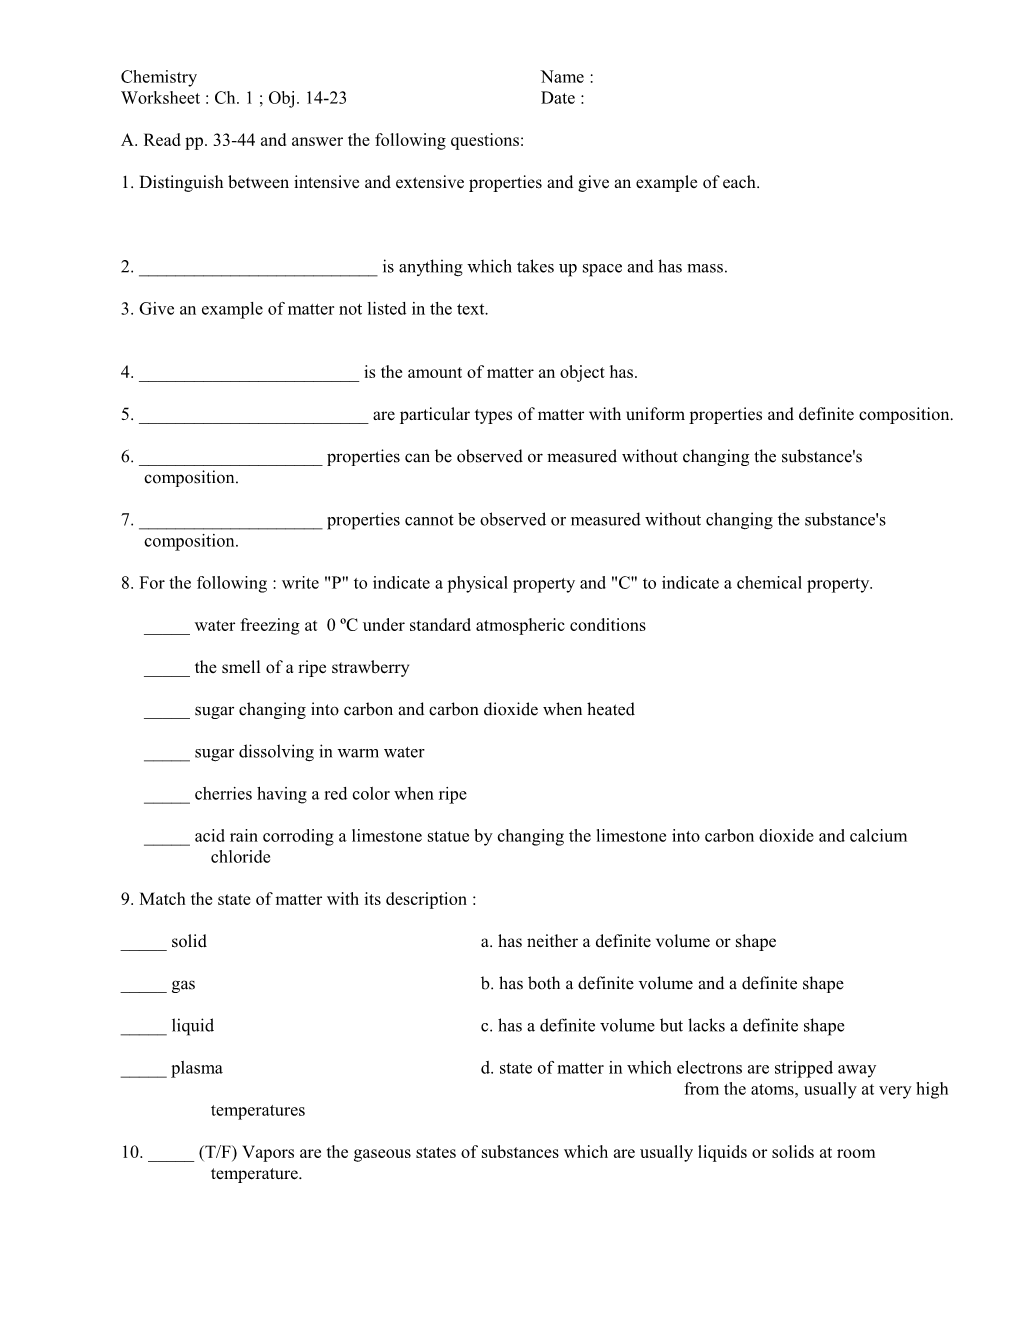 A. Read Pp. 33-44 and Answer the Following Questions